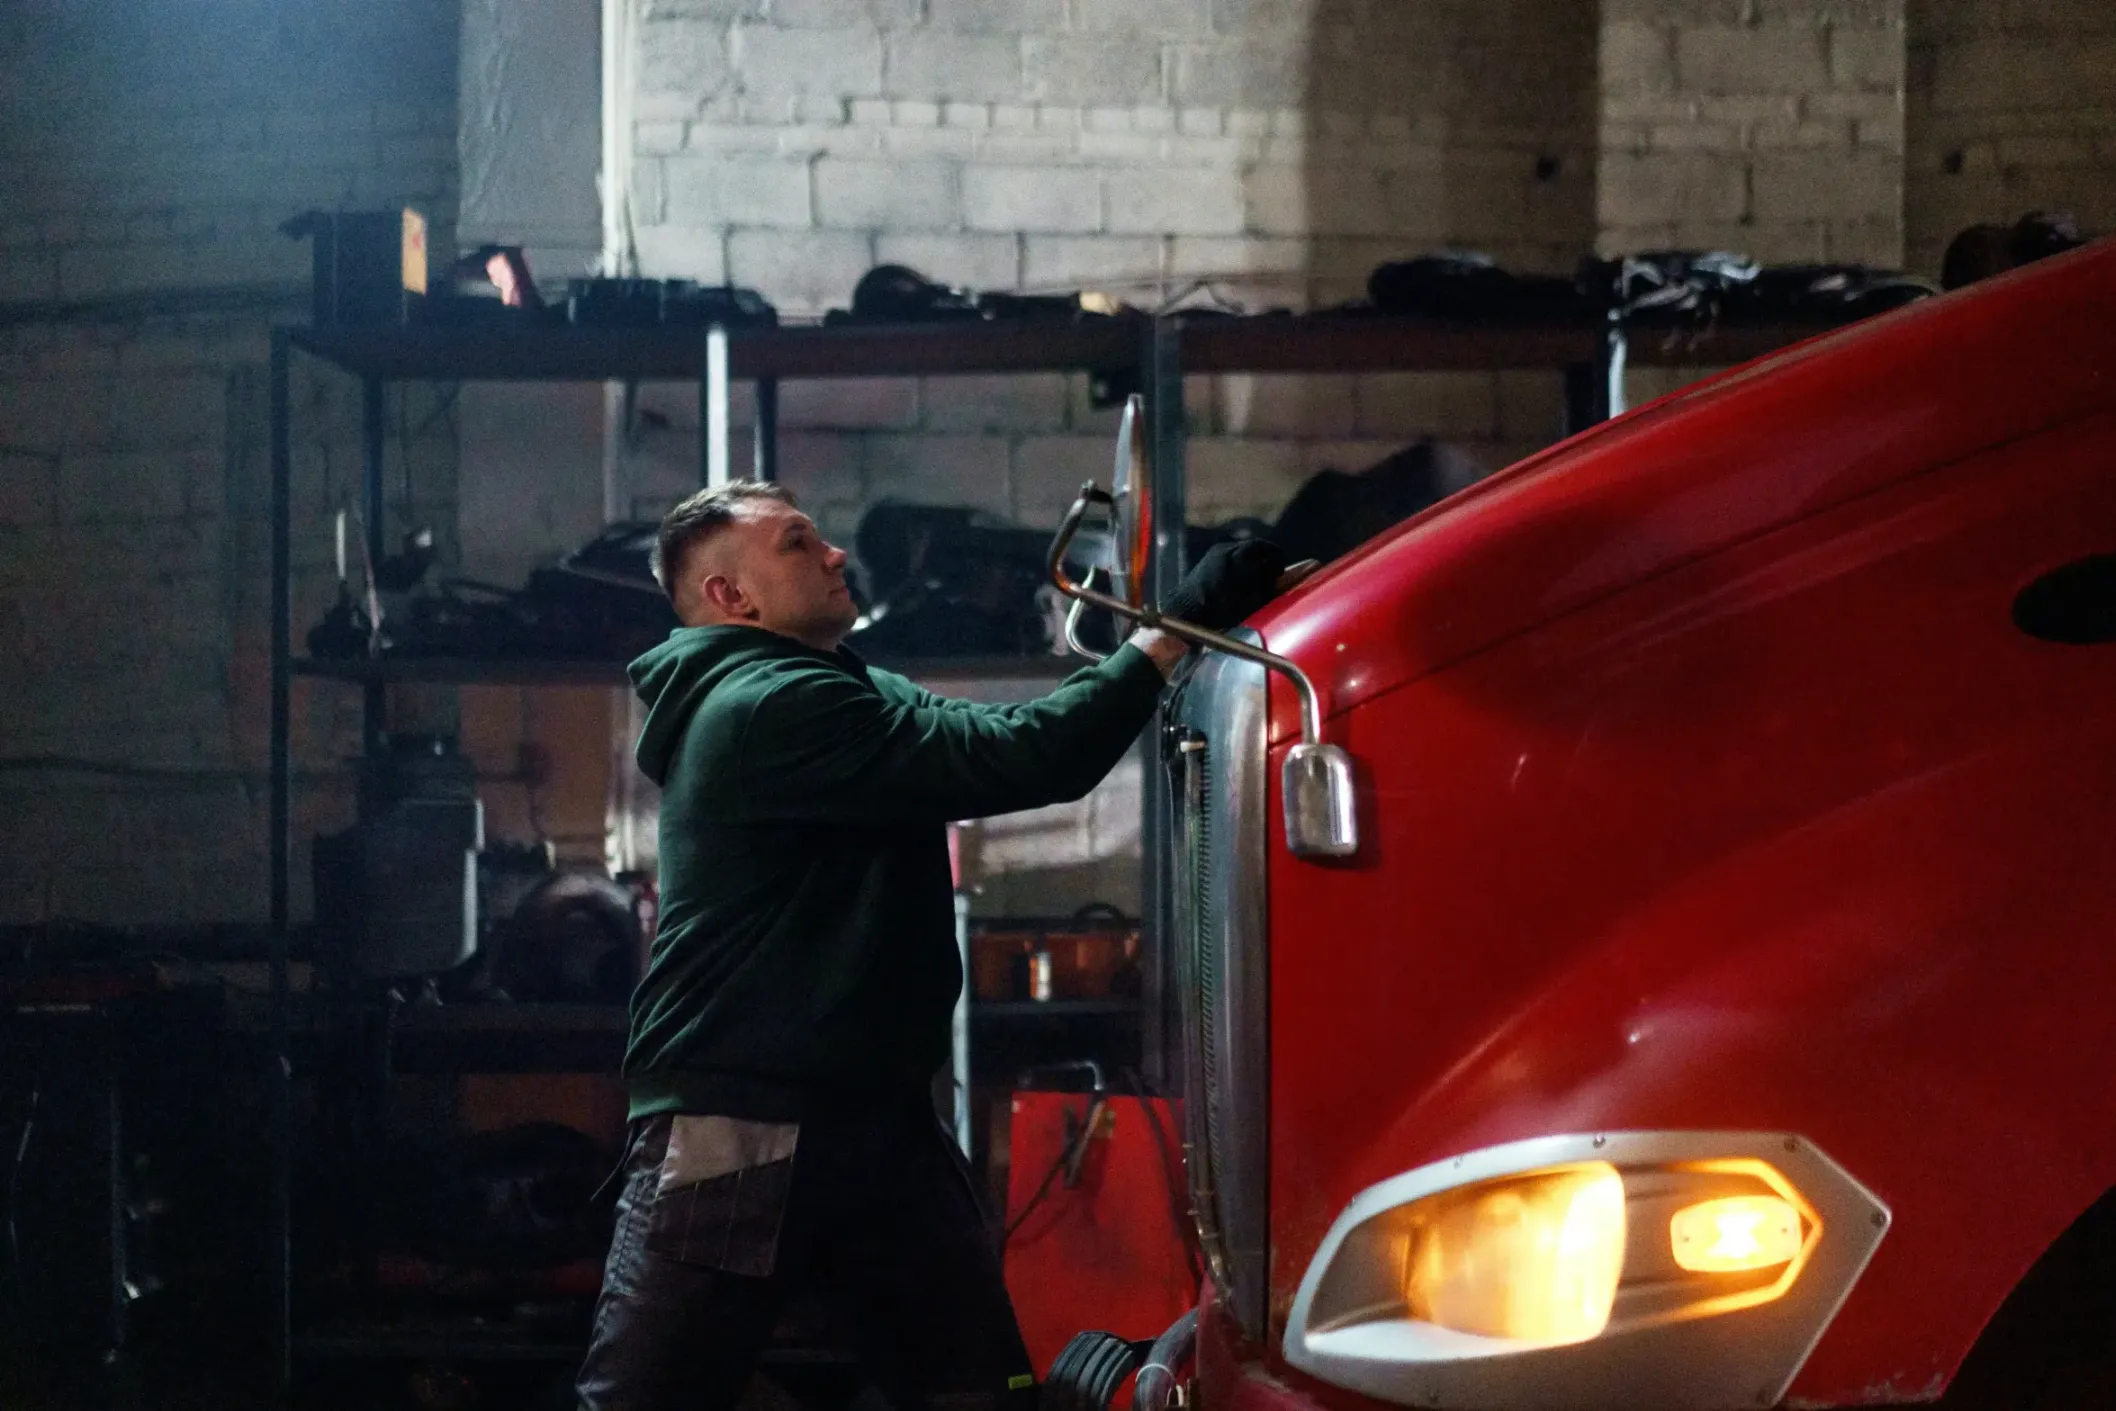 A mechanic working on a commercial truck.